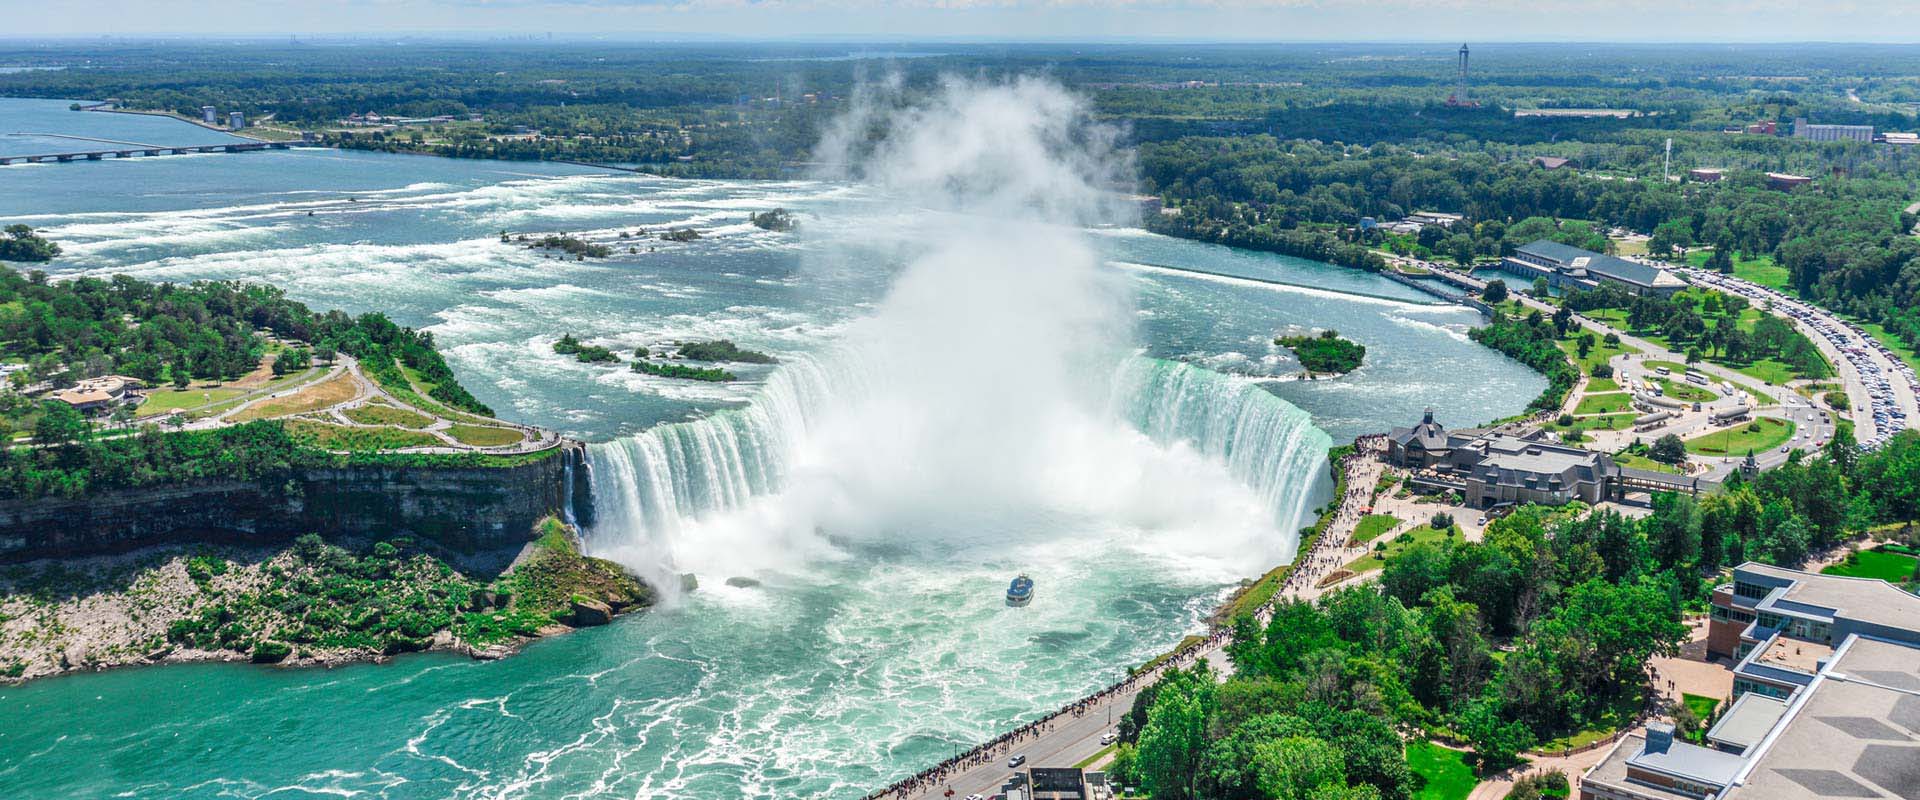 Do You Need a Passport to go to Niagara Falls? The Family Vacation Guide